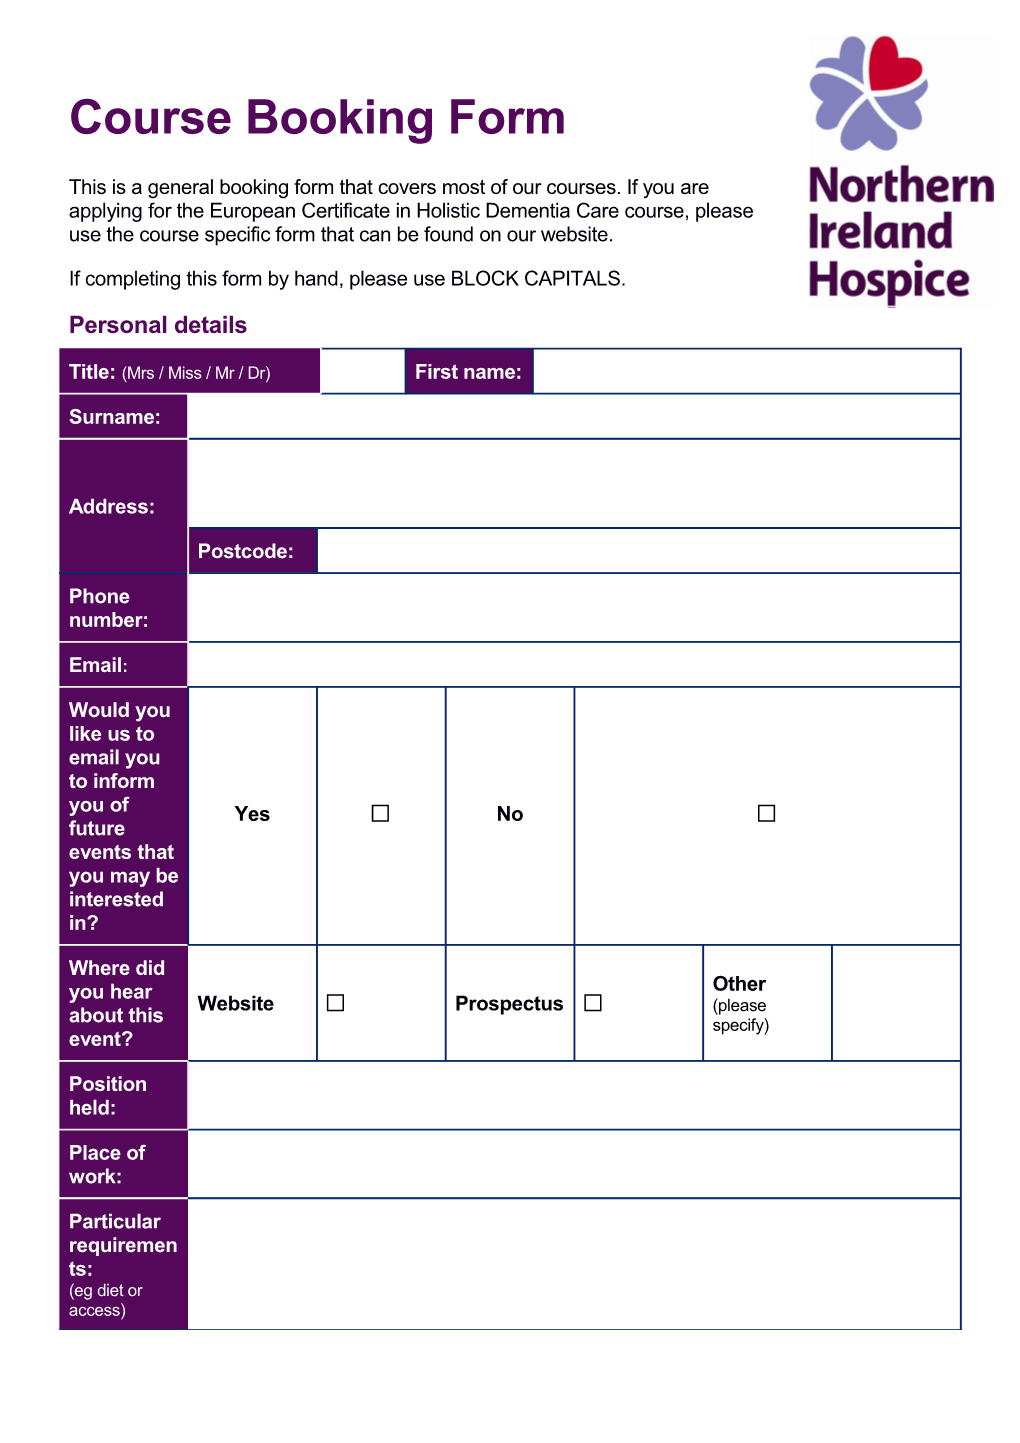 Northern Ireland Hospice Booking Form